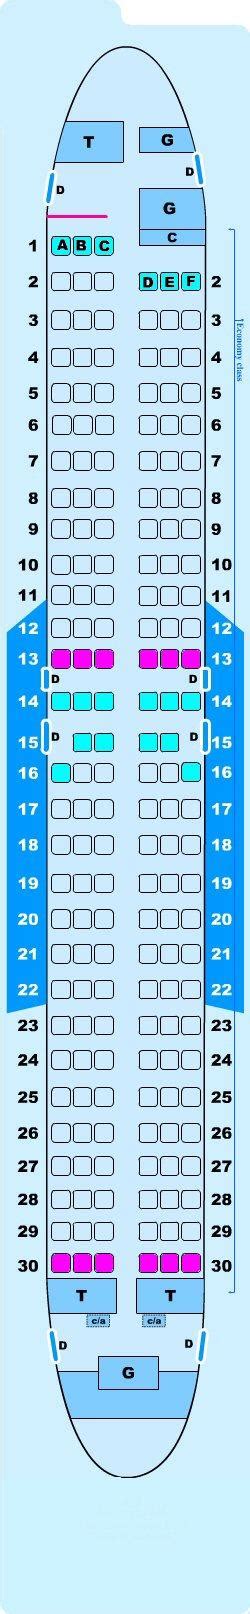 Boeing 737-800 seat map Author: Qantas Created Date: 20181121134158Z .... 